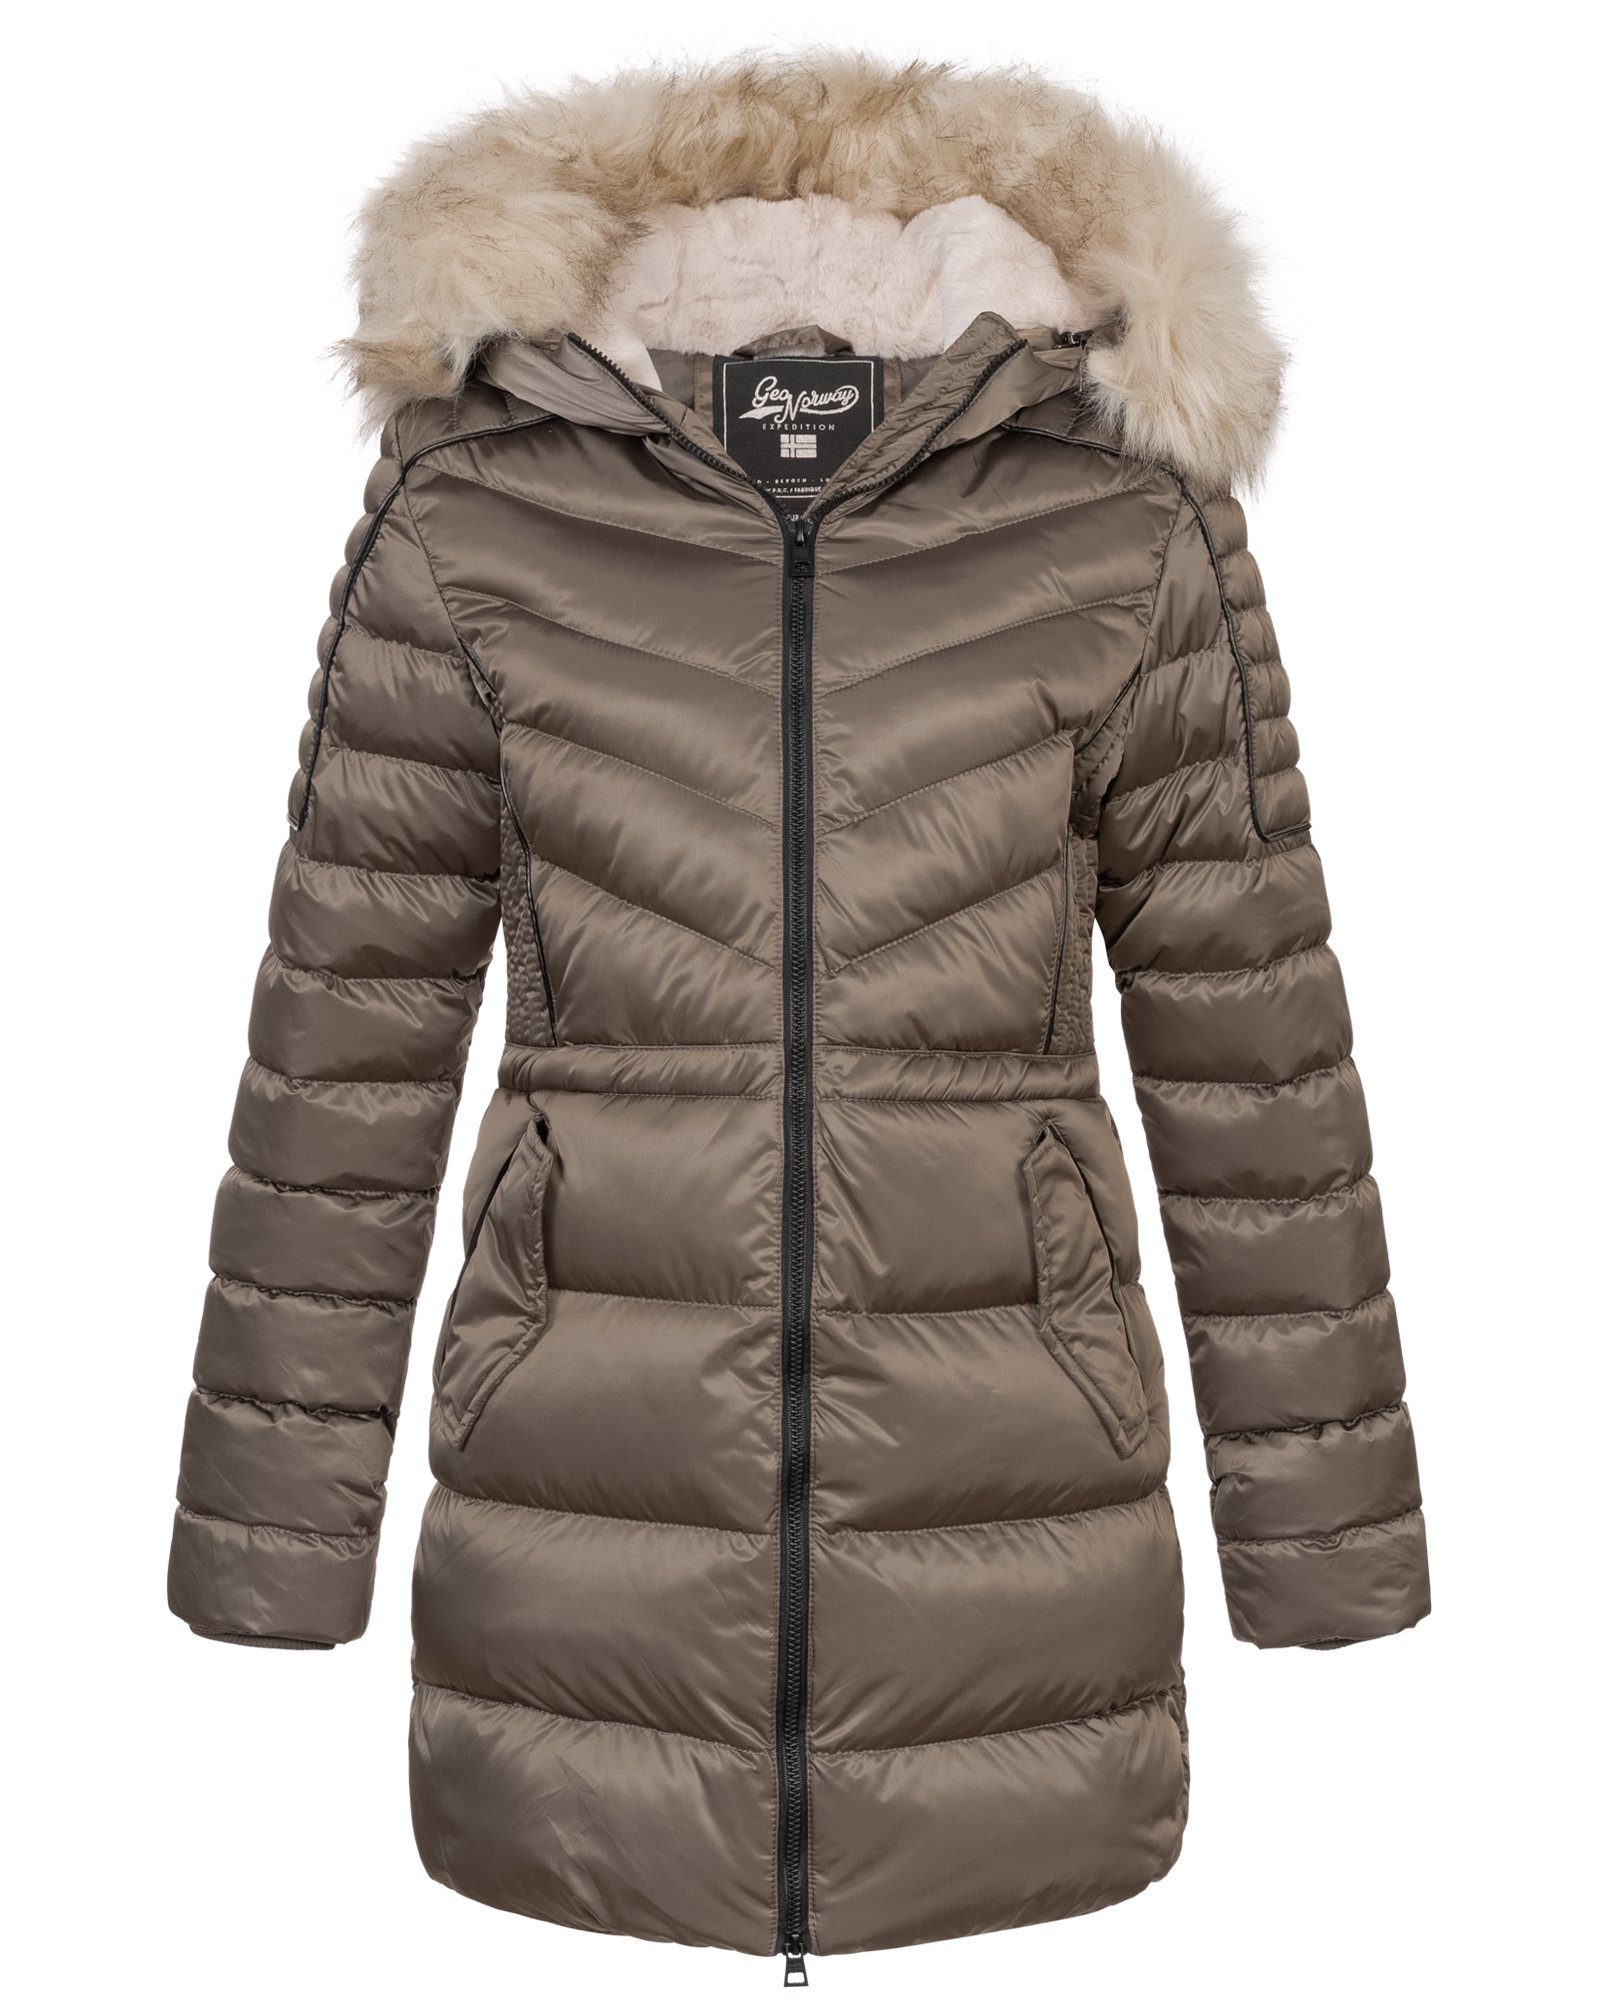 Geographical Norway Steppjacke Damen Winter Jacke Mantel Parka Steppjacke Steppmantel Wintermantel Taupe